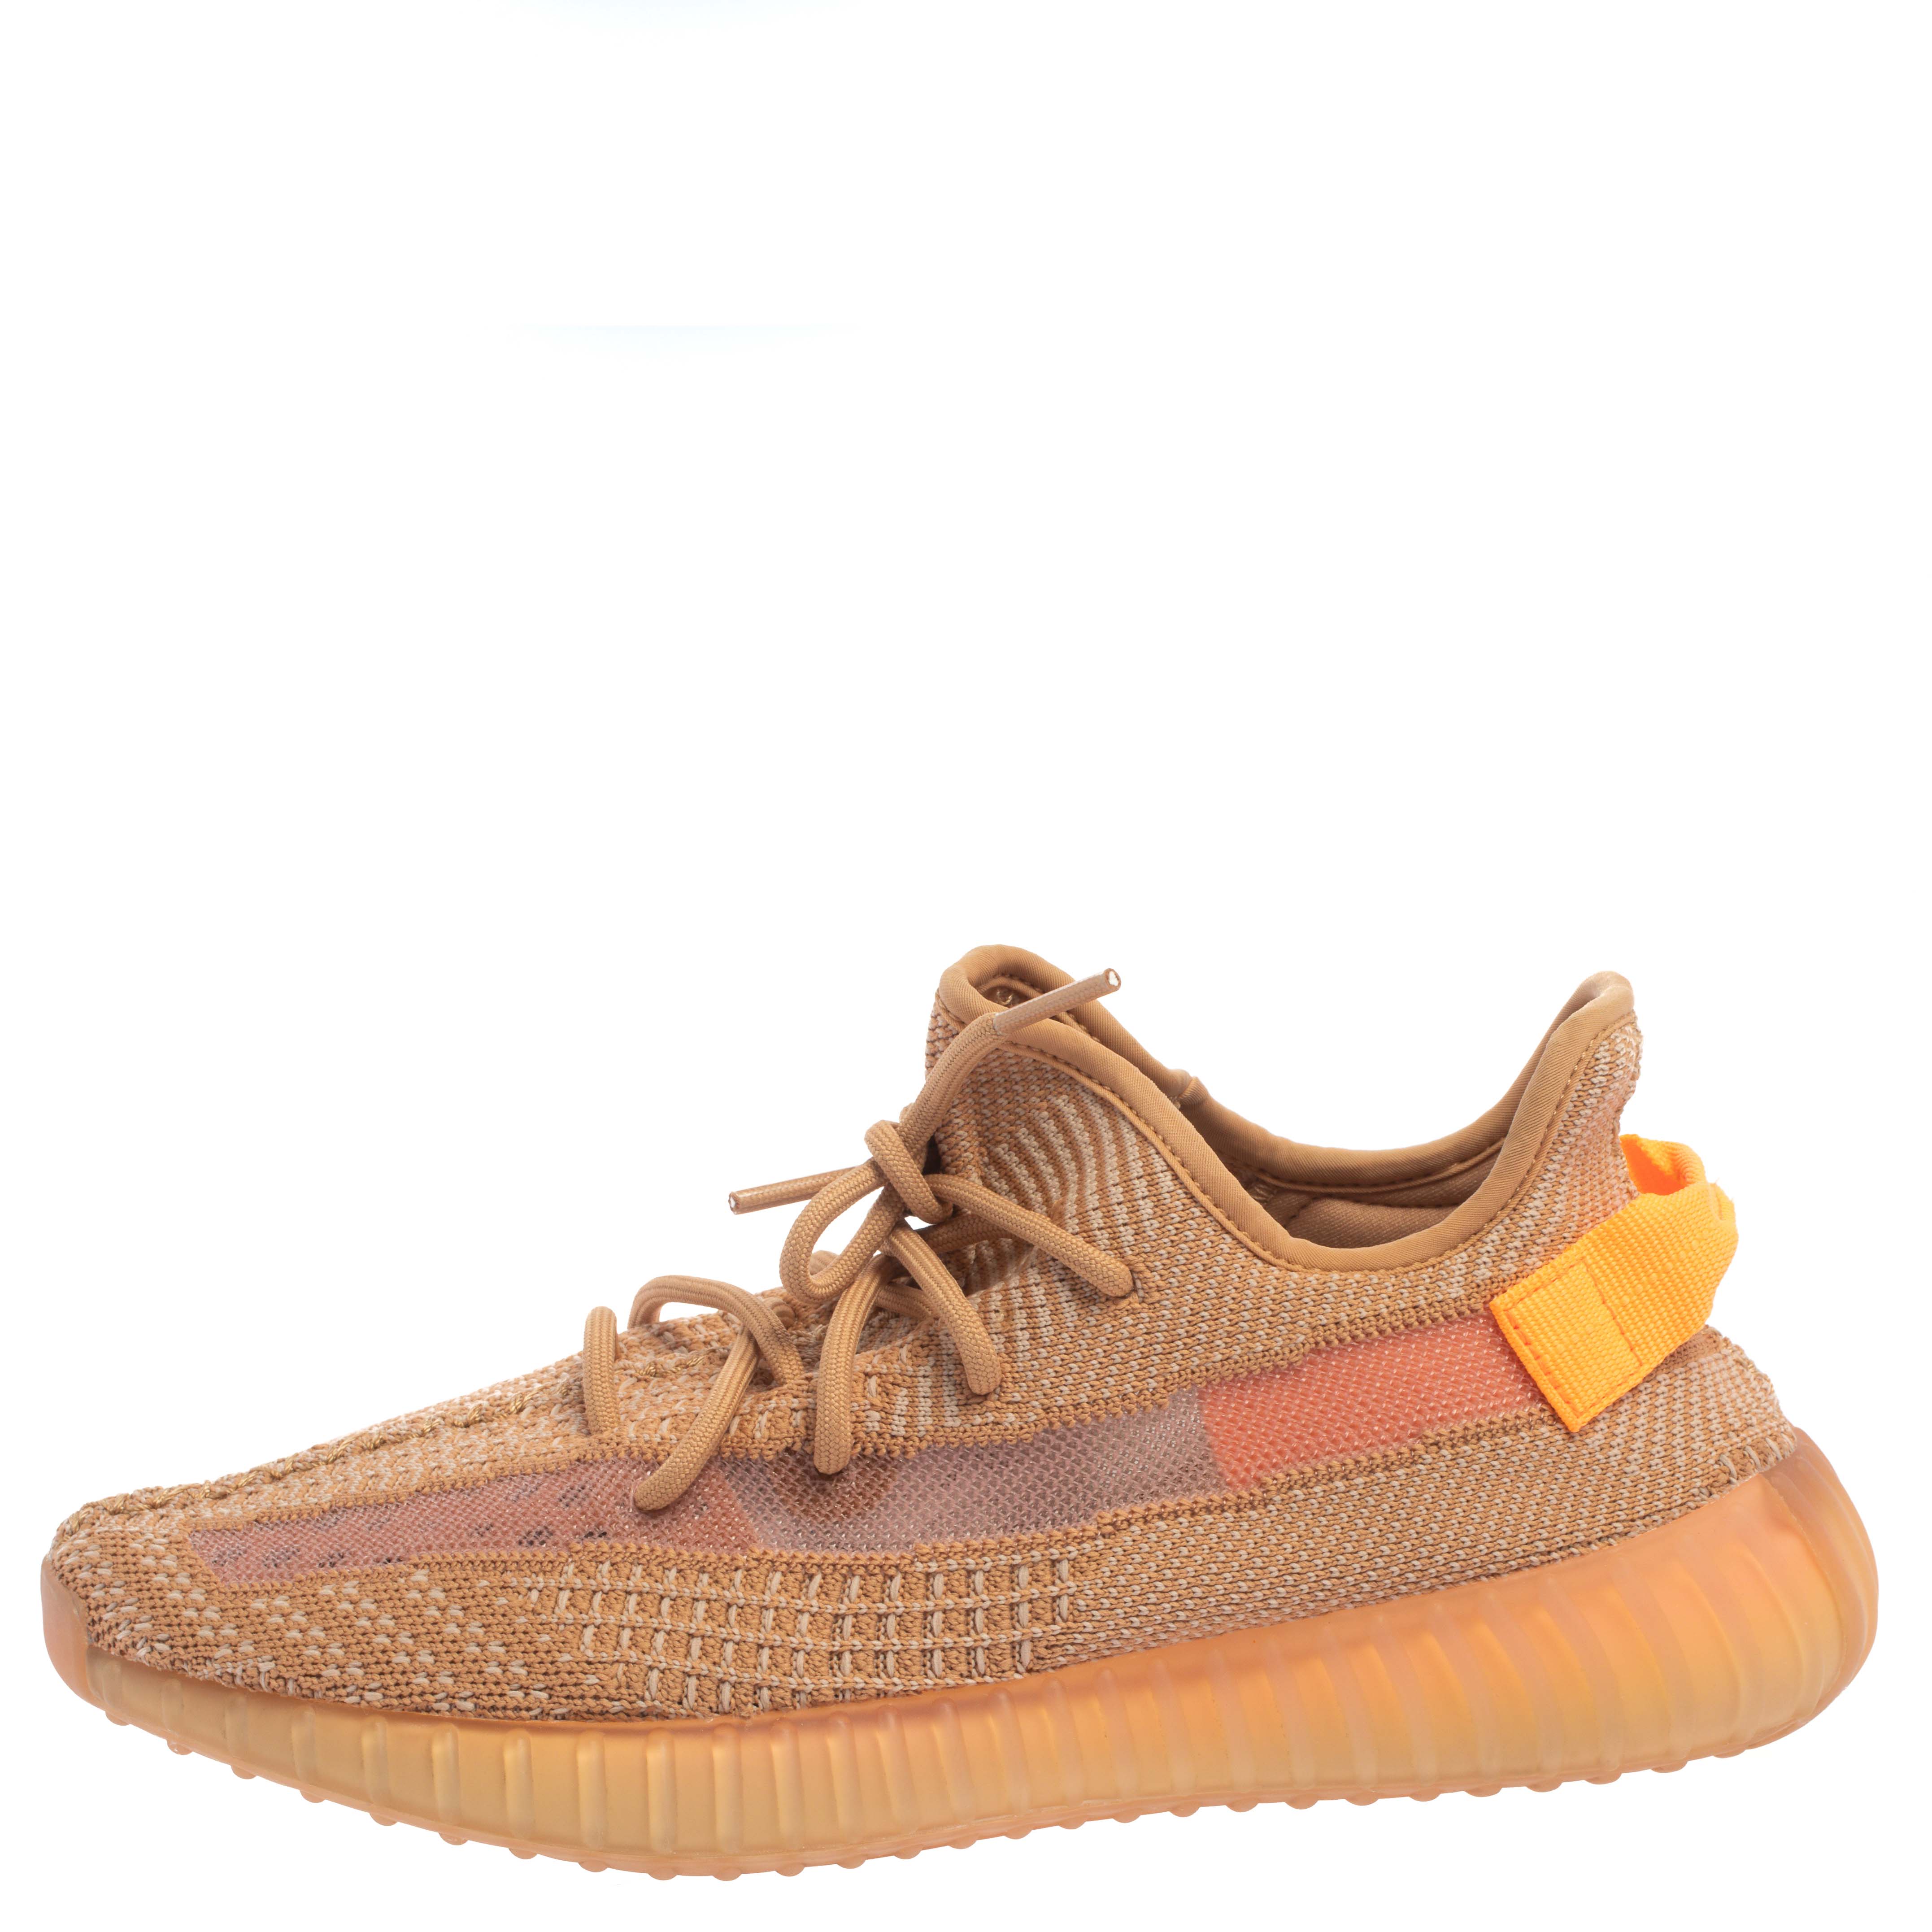 

Adidas Yeezy Boost 350 V2 Cotton Knit Clay Sneakers Size 42 2/3, Beige